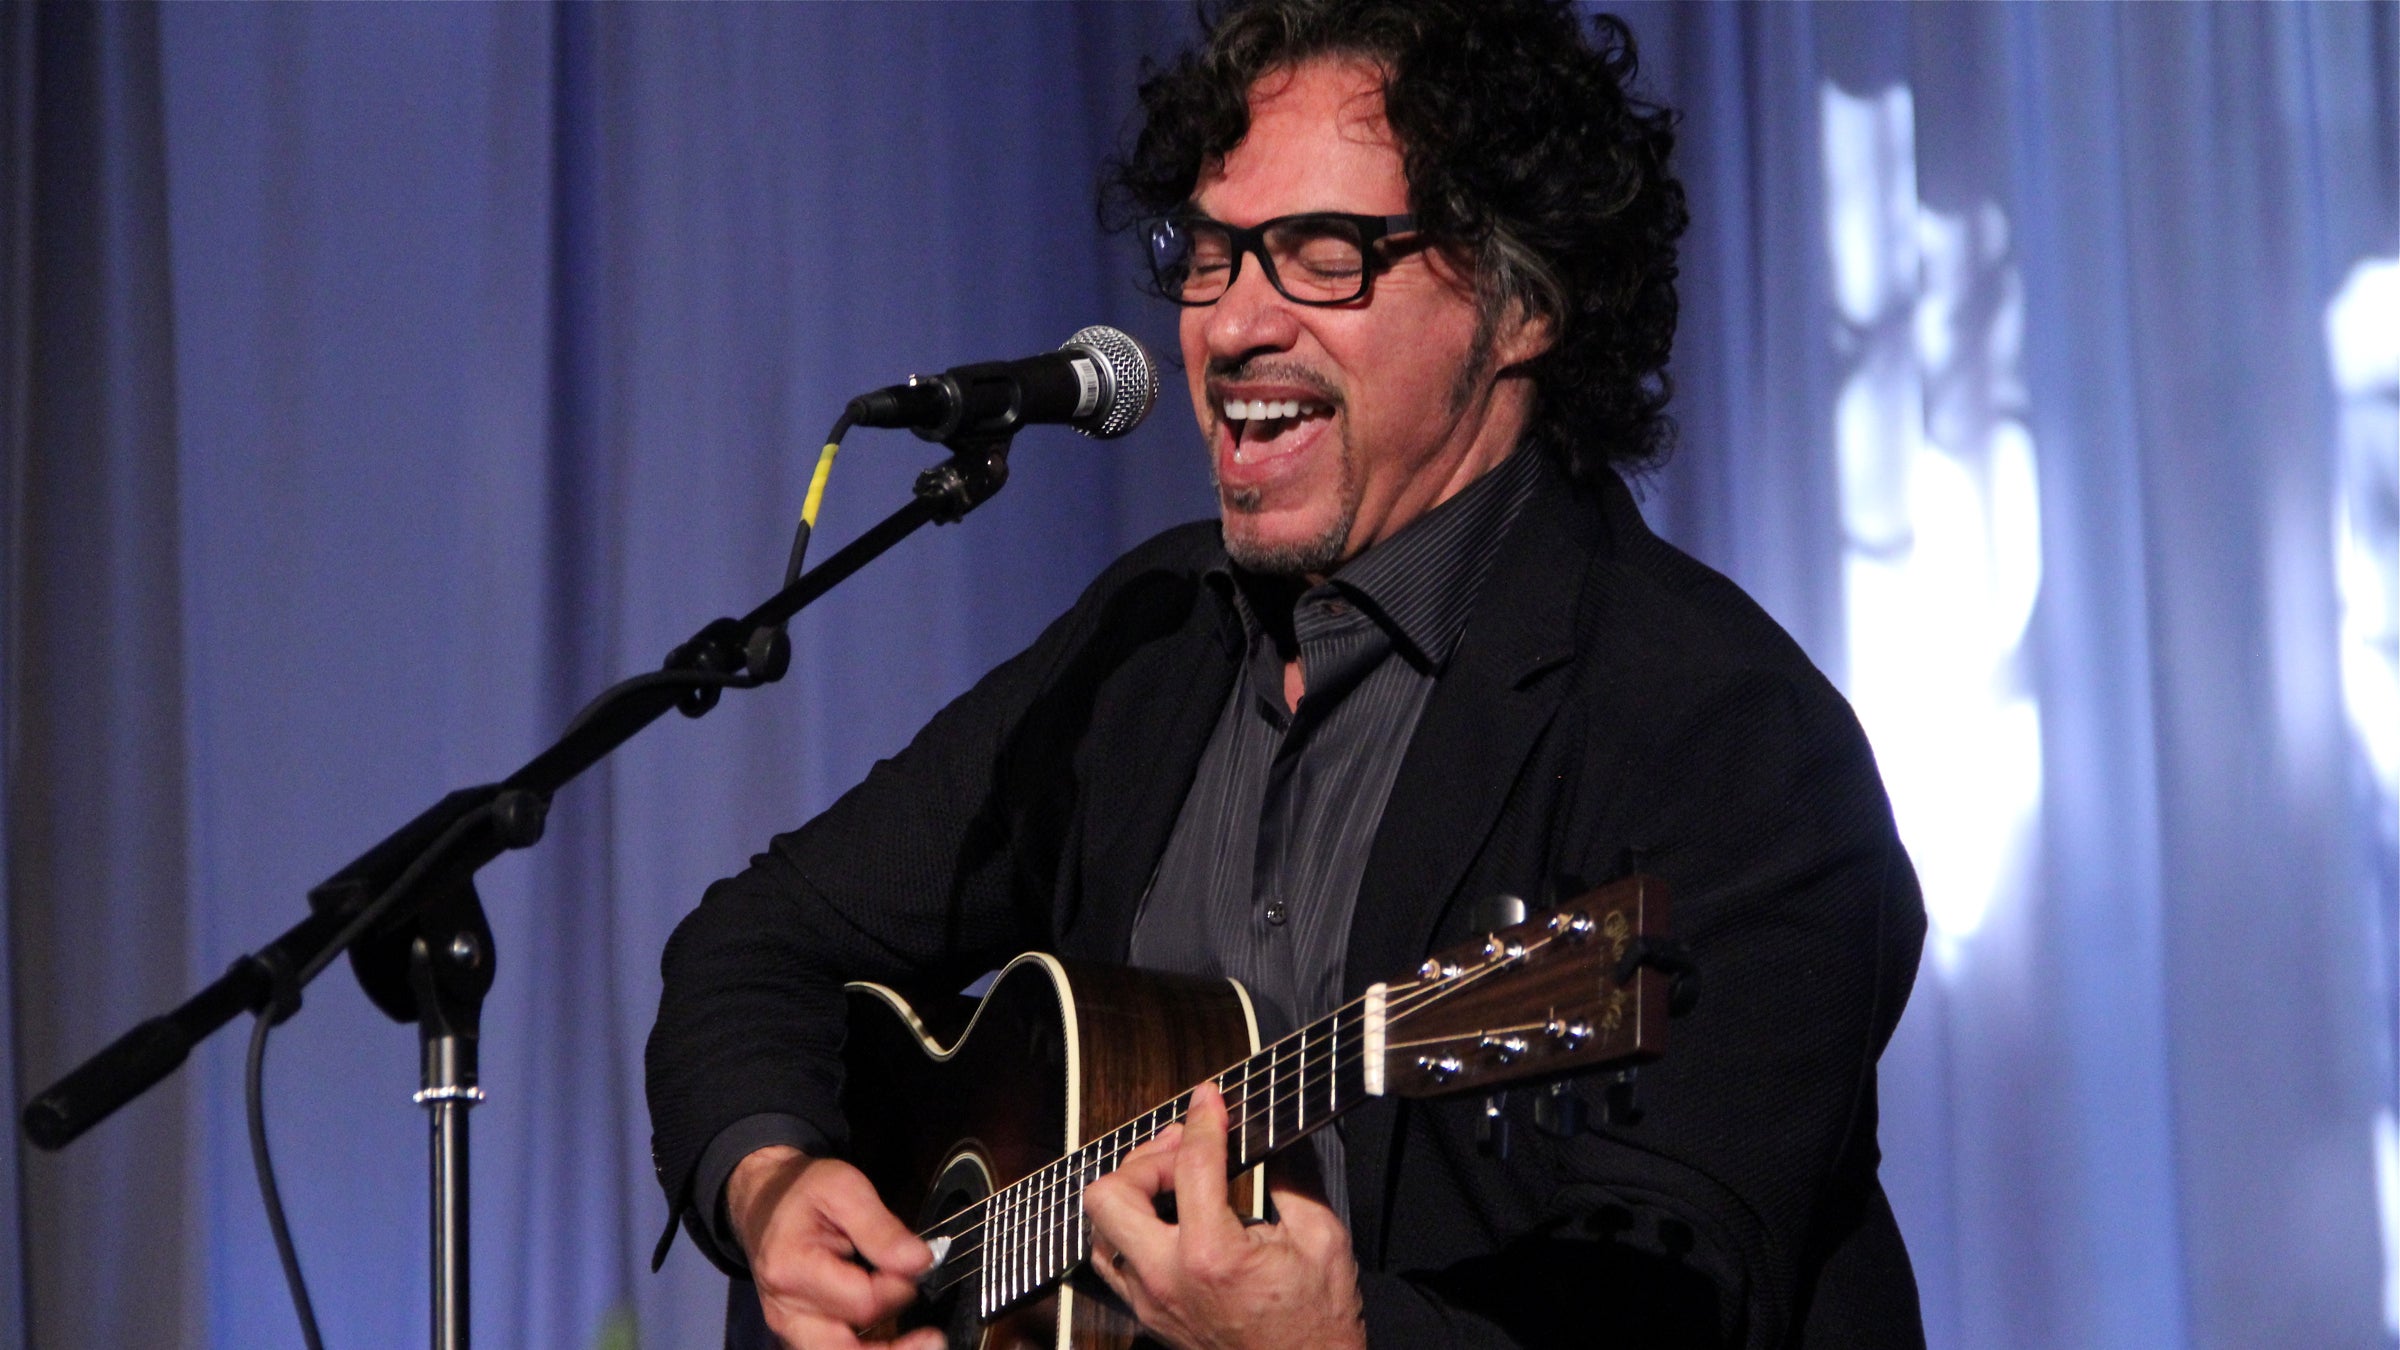  John Oates, musician and songwriter of the Hall and Oates duo, performs at Temple University's Mitten Hall after being inducted into the school's Hall of Fame. (Emma Lee/WHYY) 